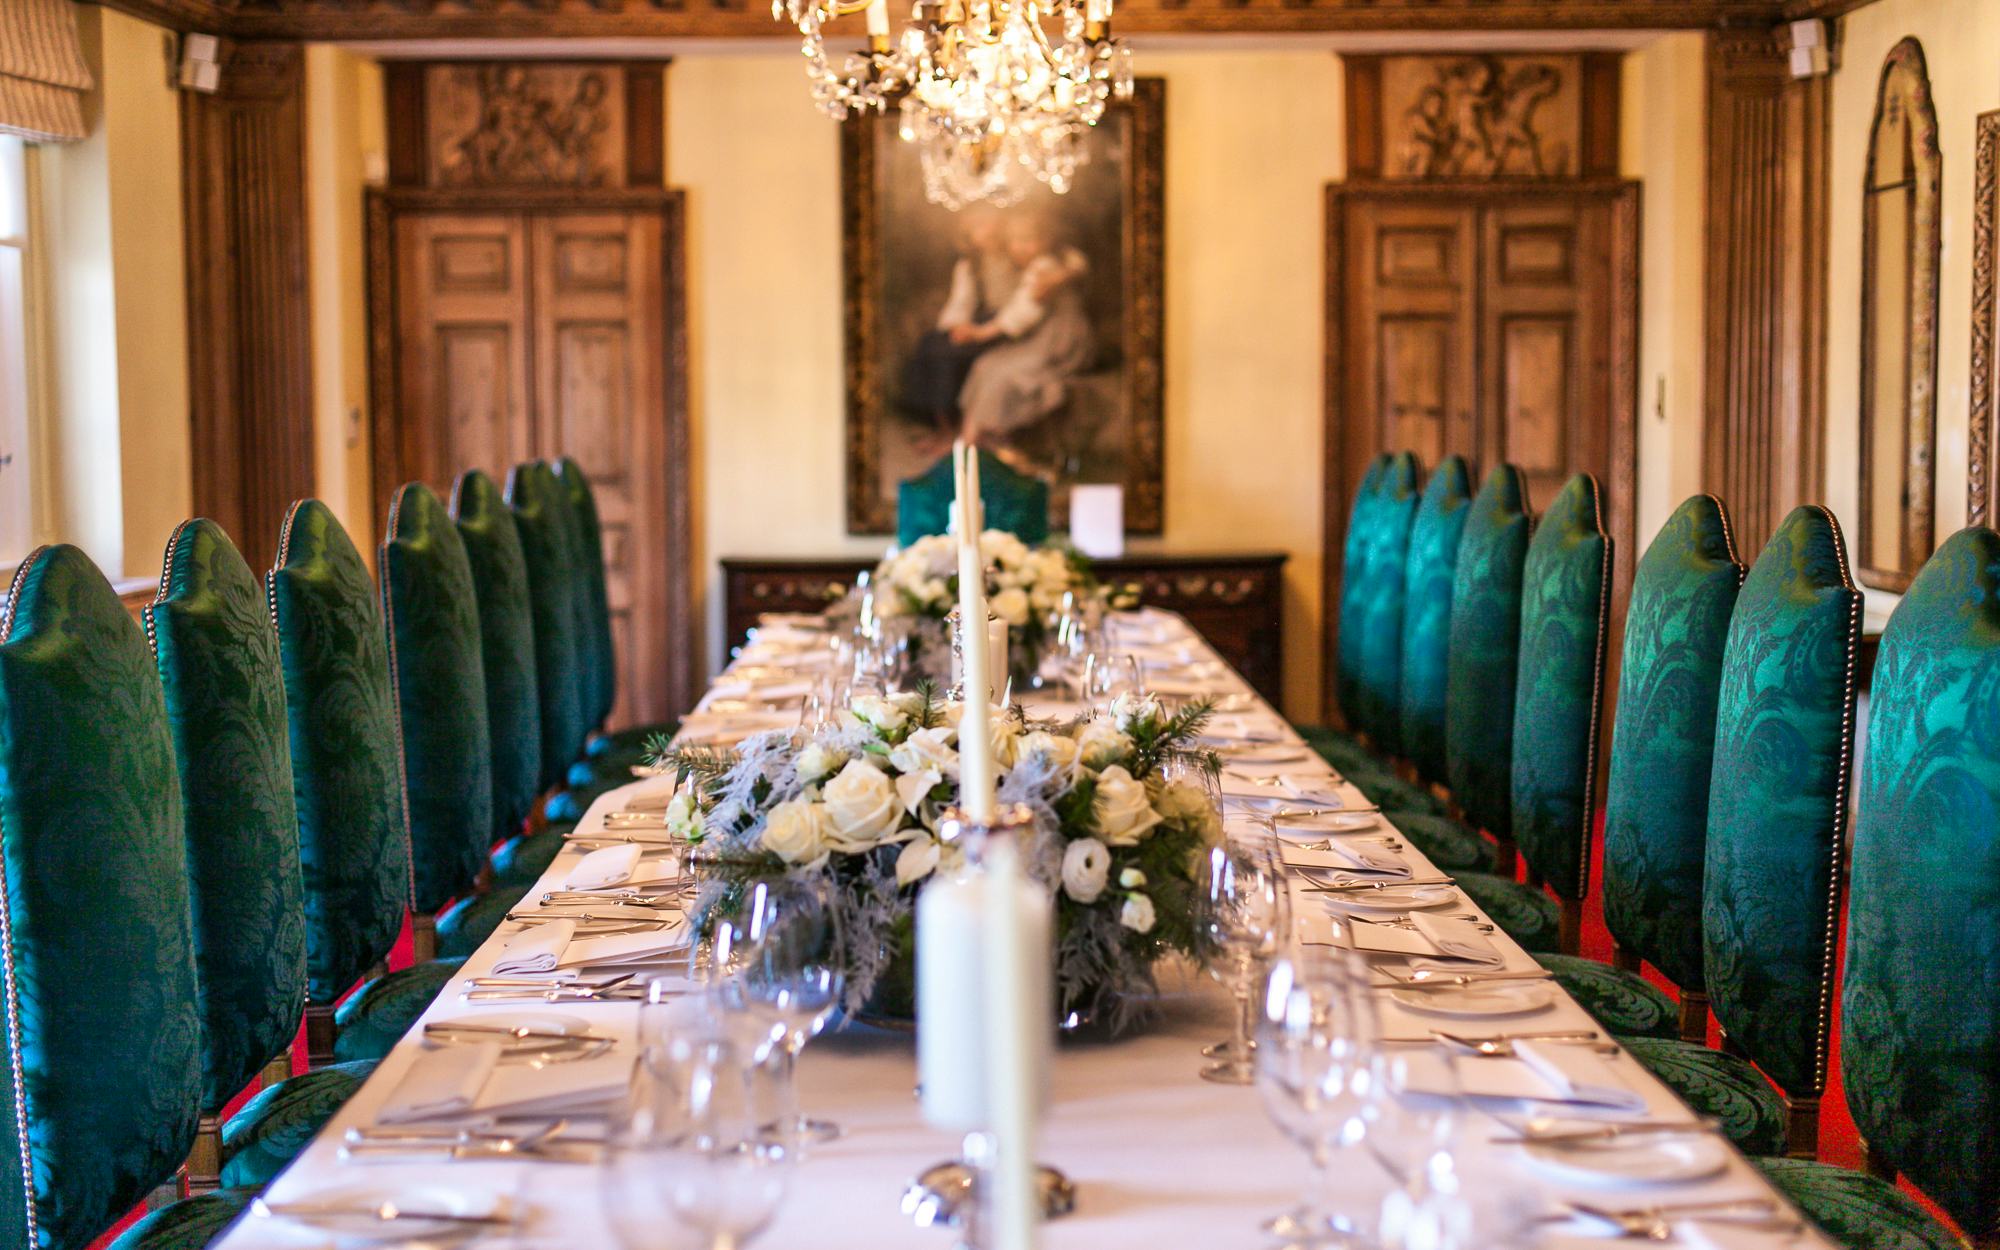 Fortnum and Mason luxury private room hire events venues london long table fine dining